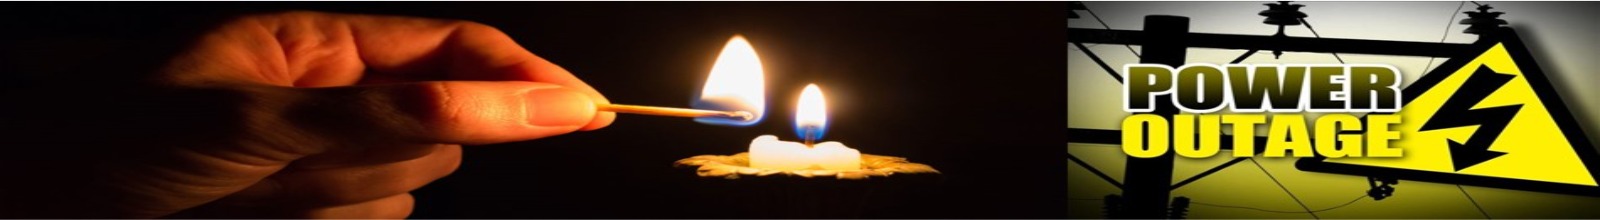 Hand hold a lit match to light a candle with the Hydro One power outage image